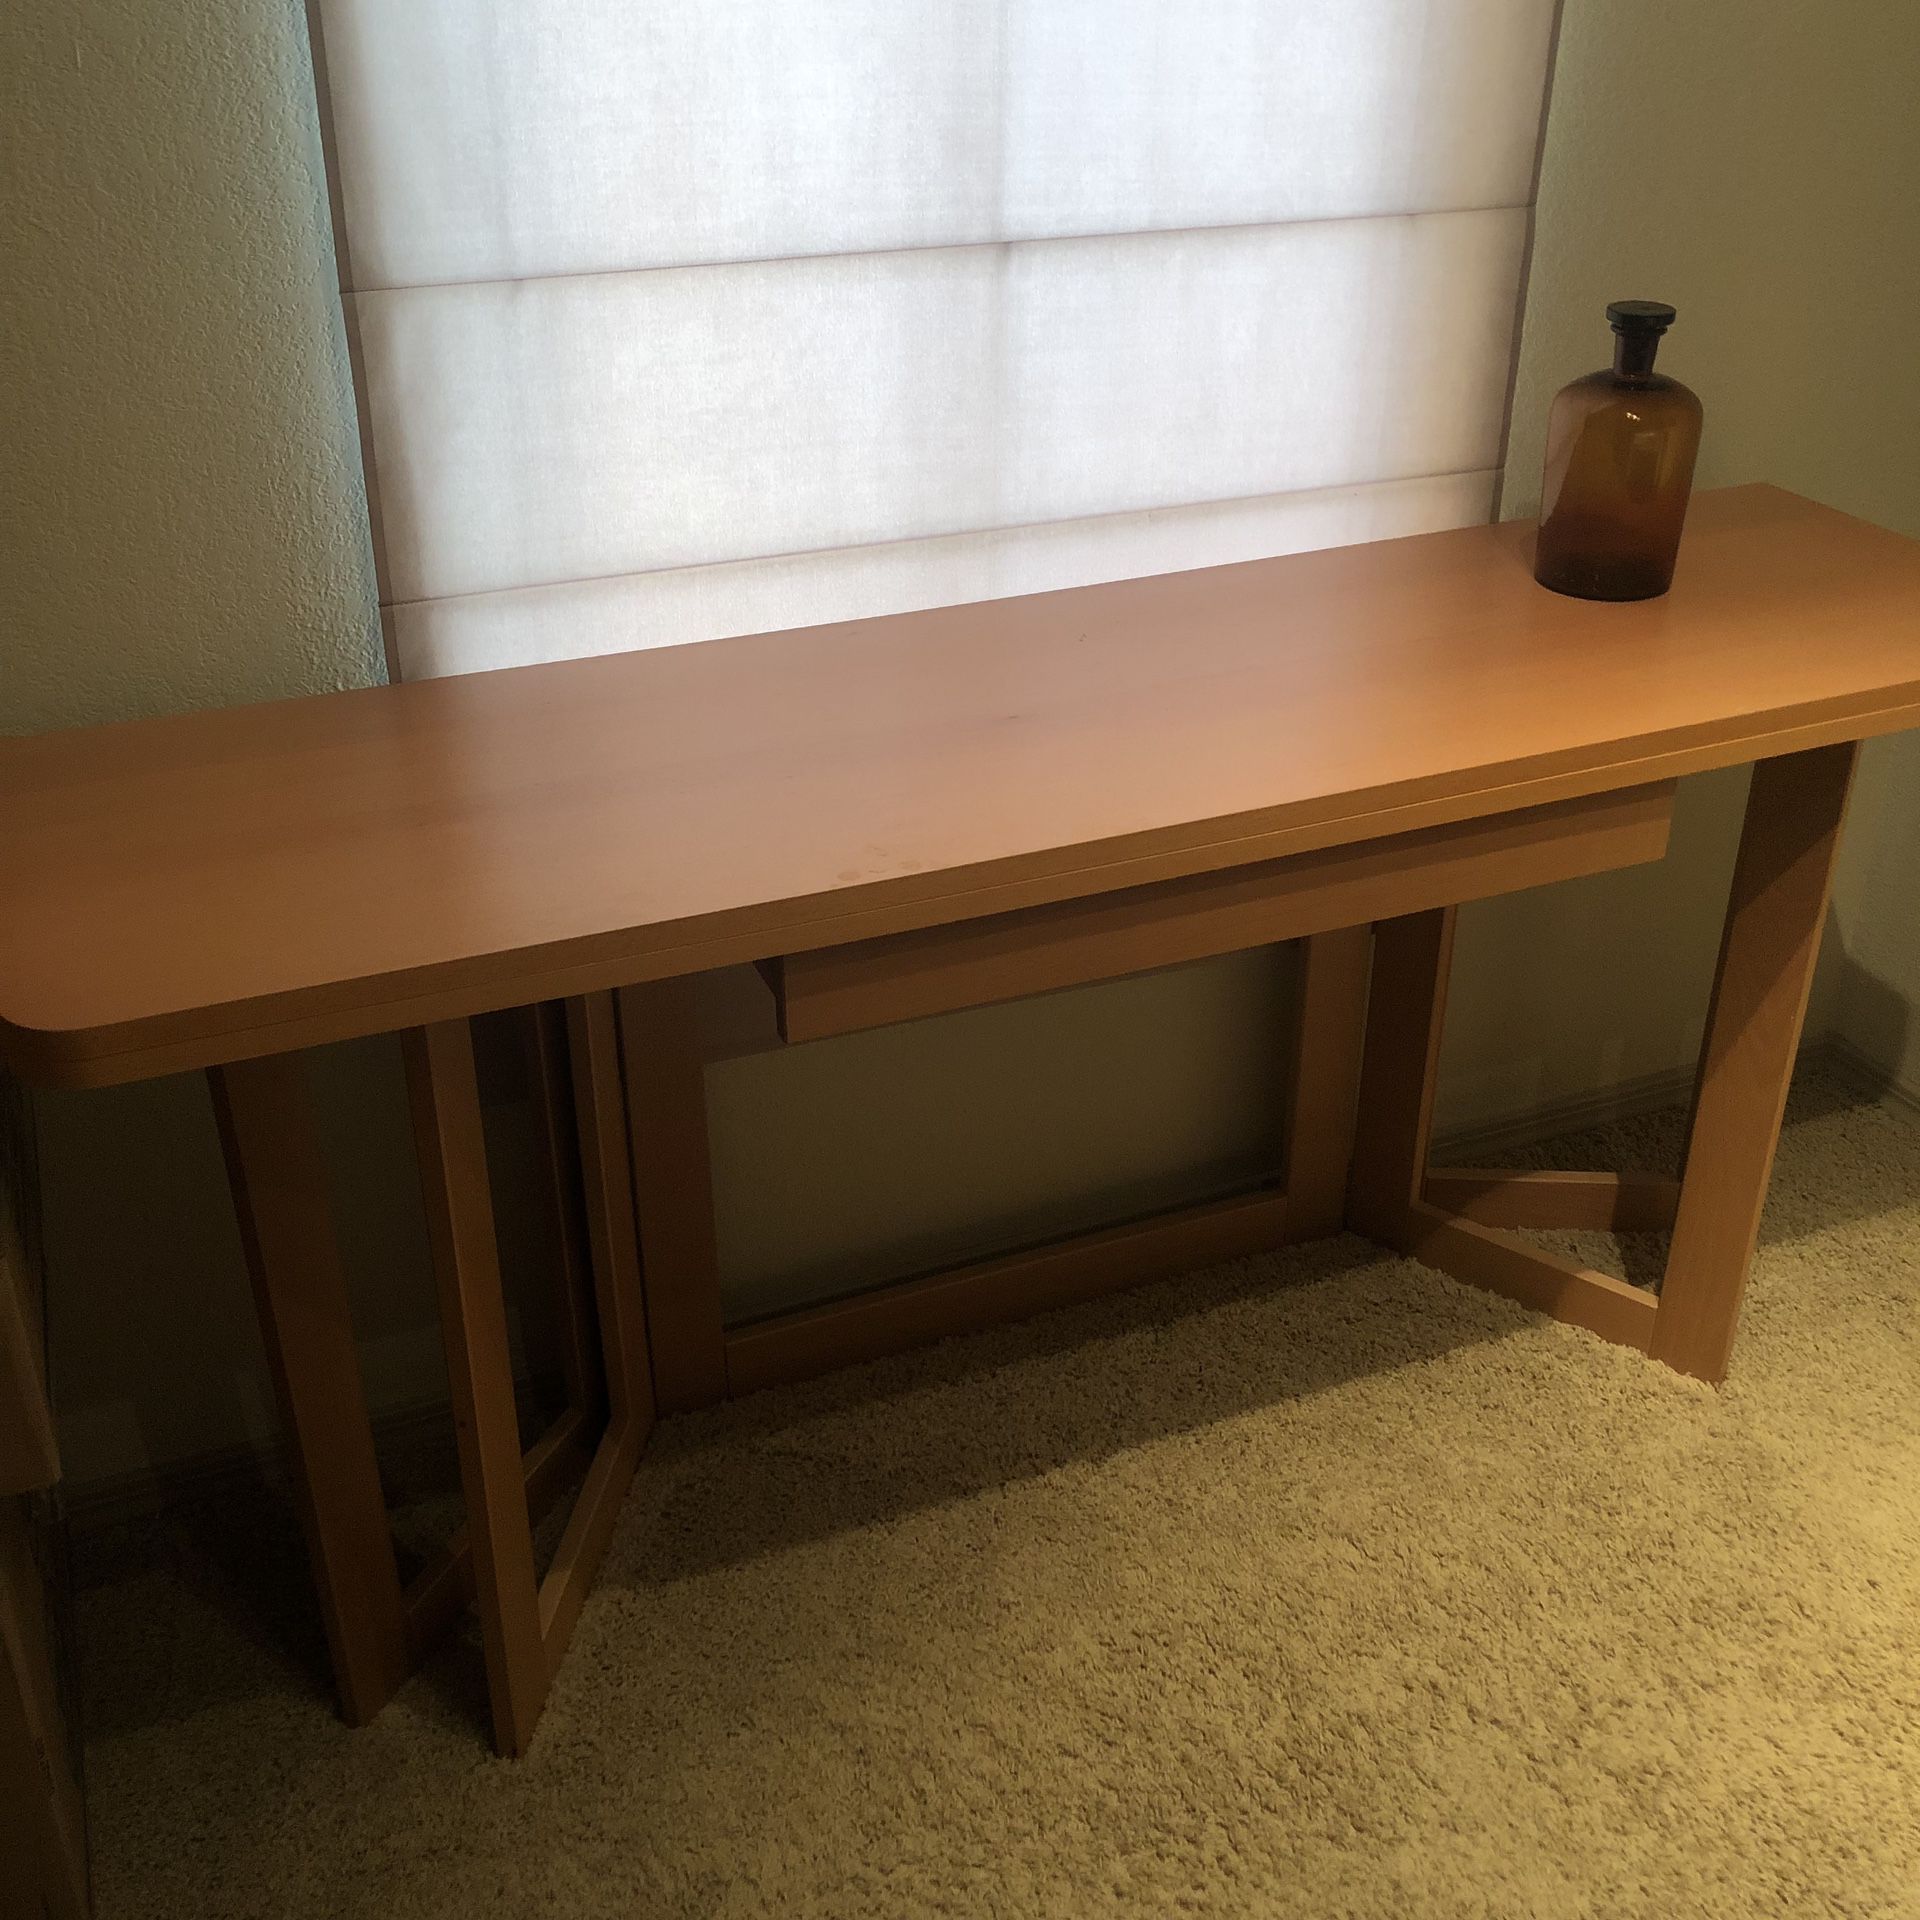 Ikea Console Table Converts to Dining Table